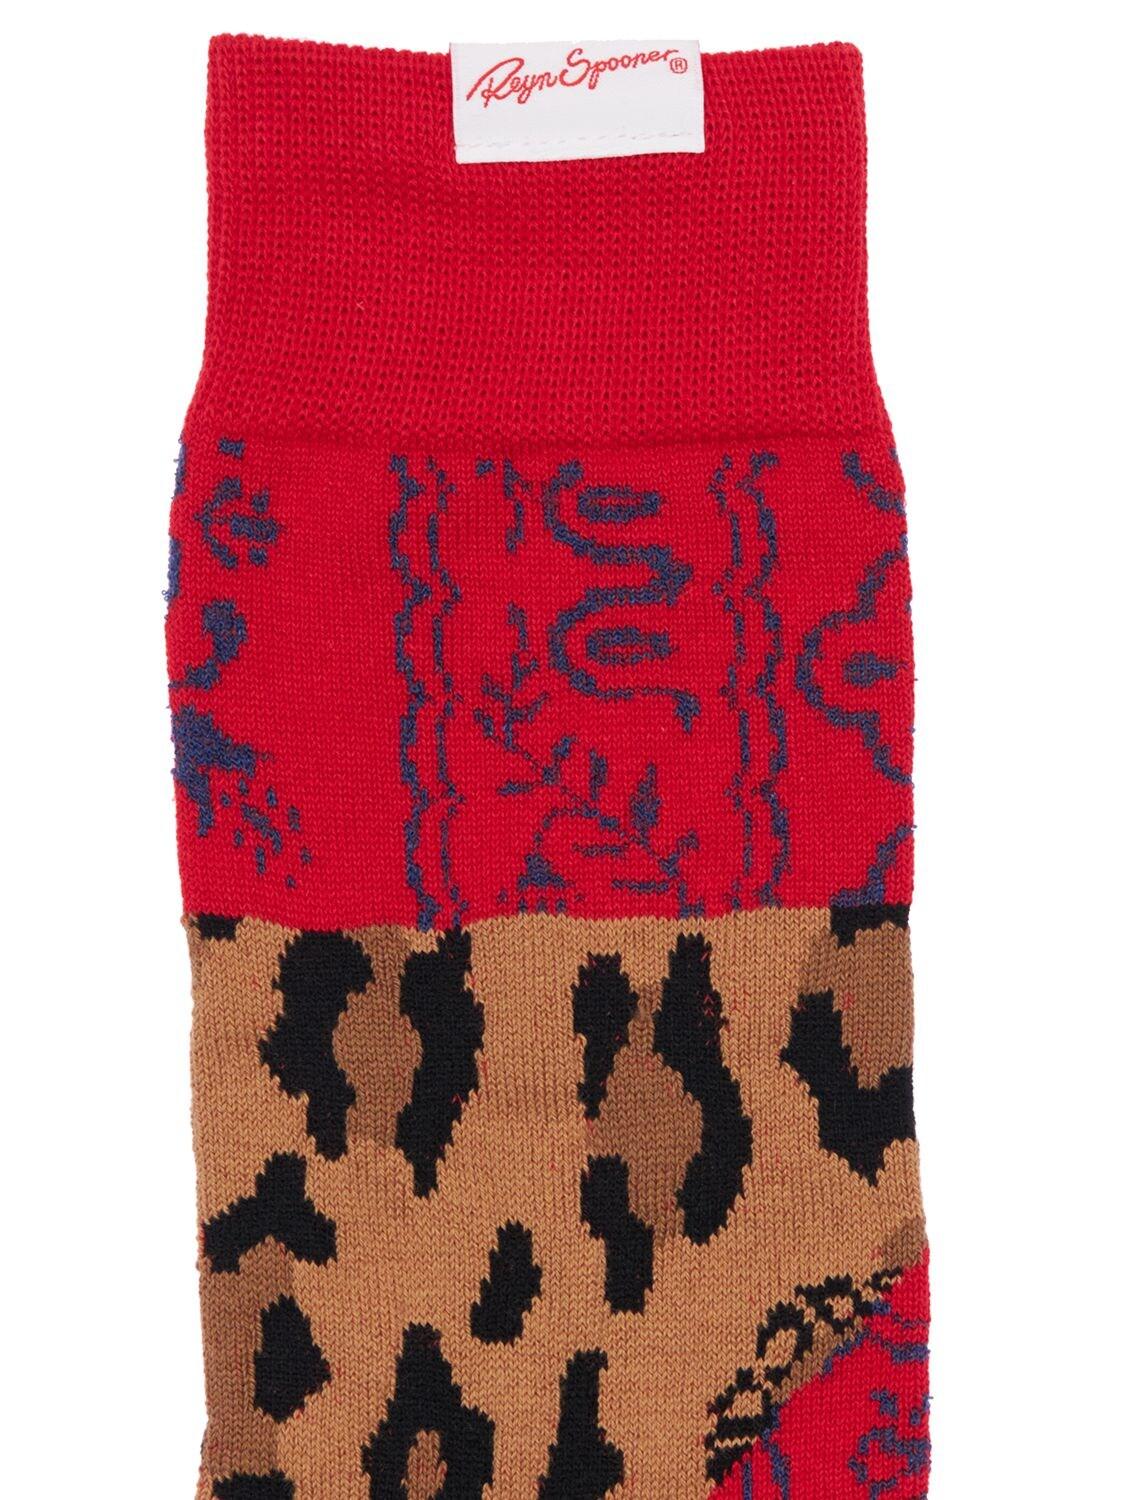 Sacai Animalier Print Cotton Blend Socks in Red/Beige (Red) for Men - Lyst